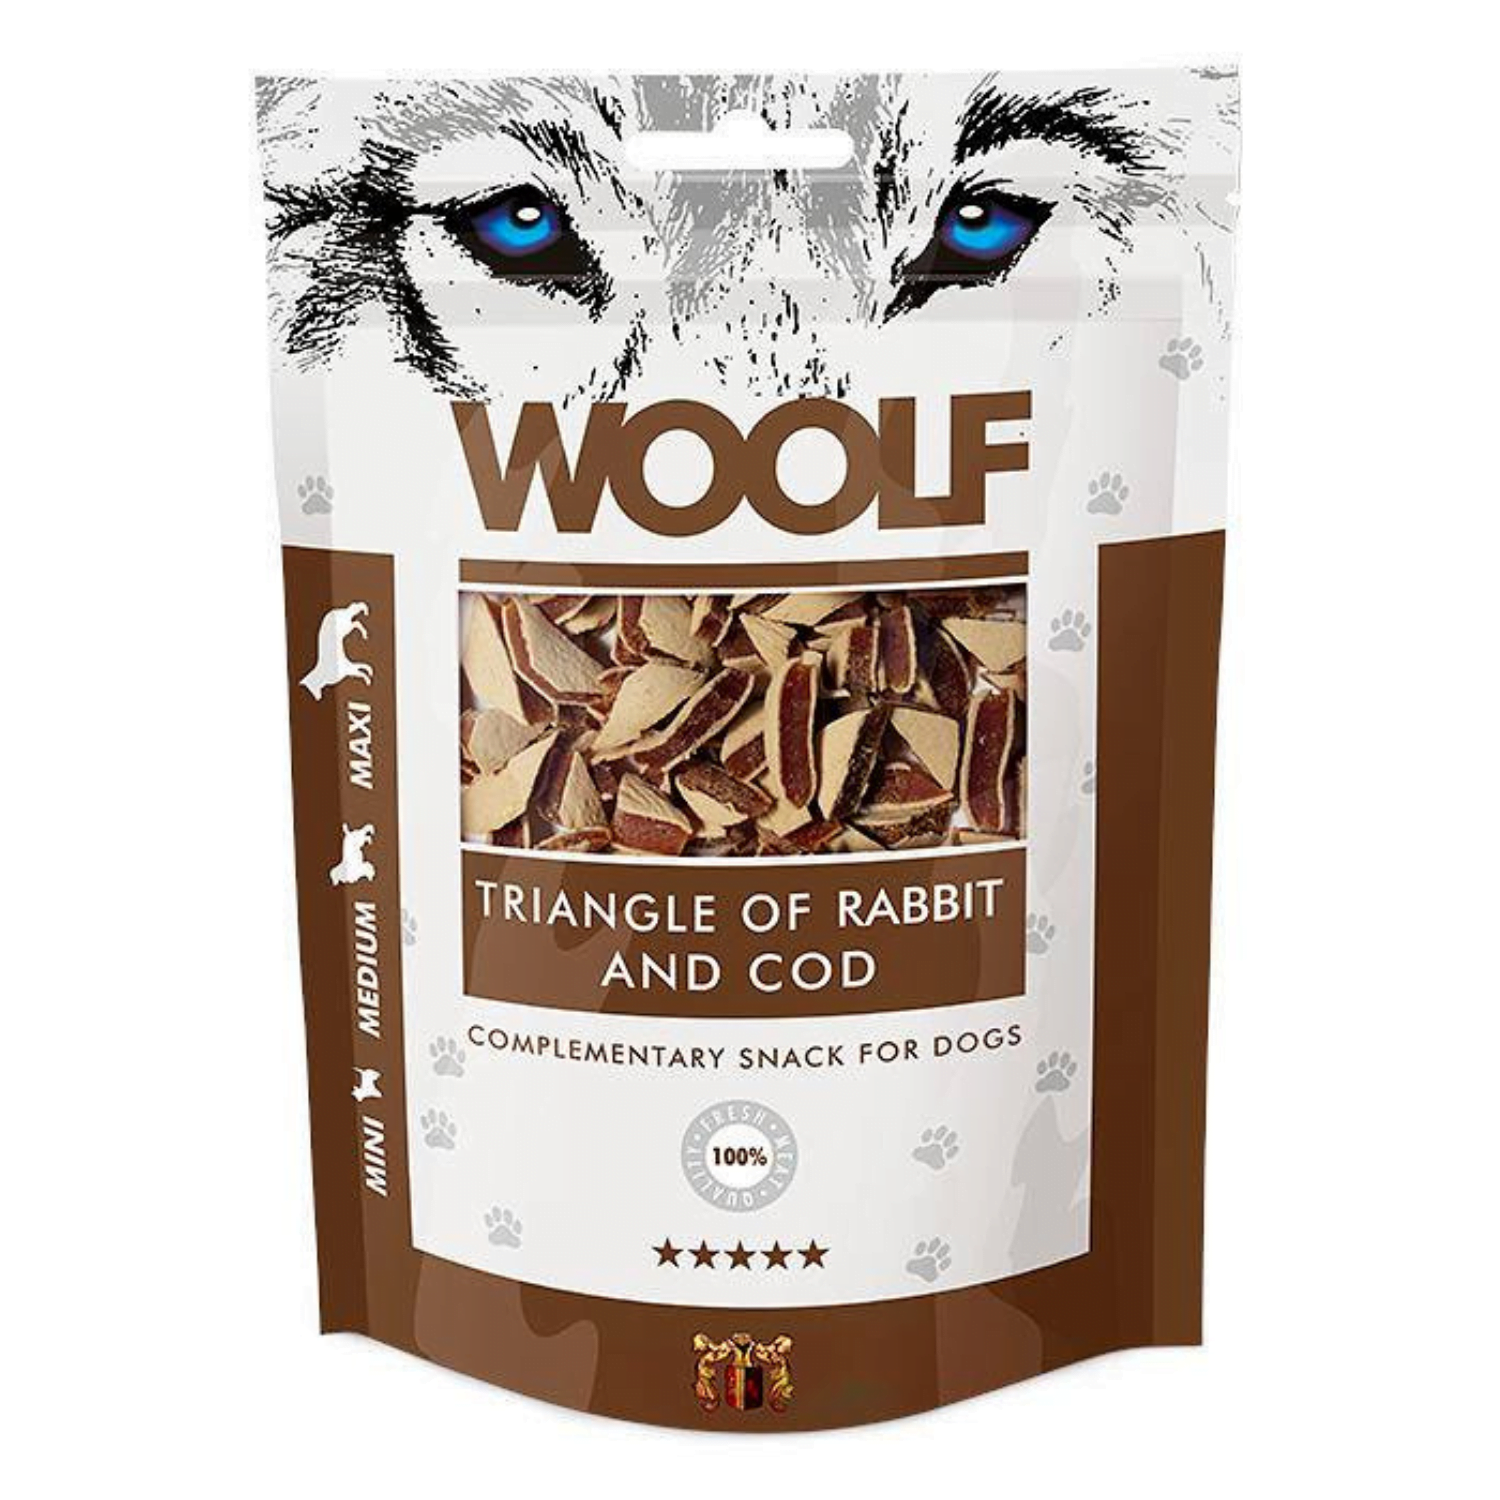 Woolf Rabibit And Cod Triangle 100g